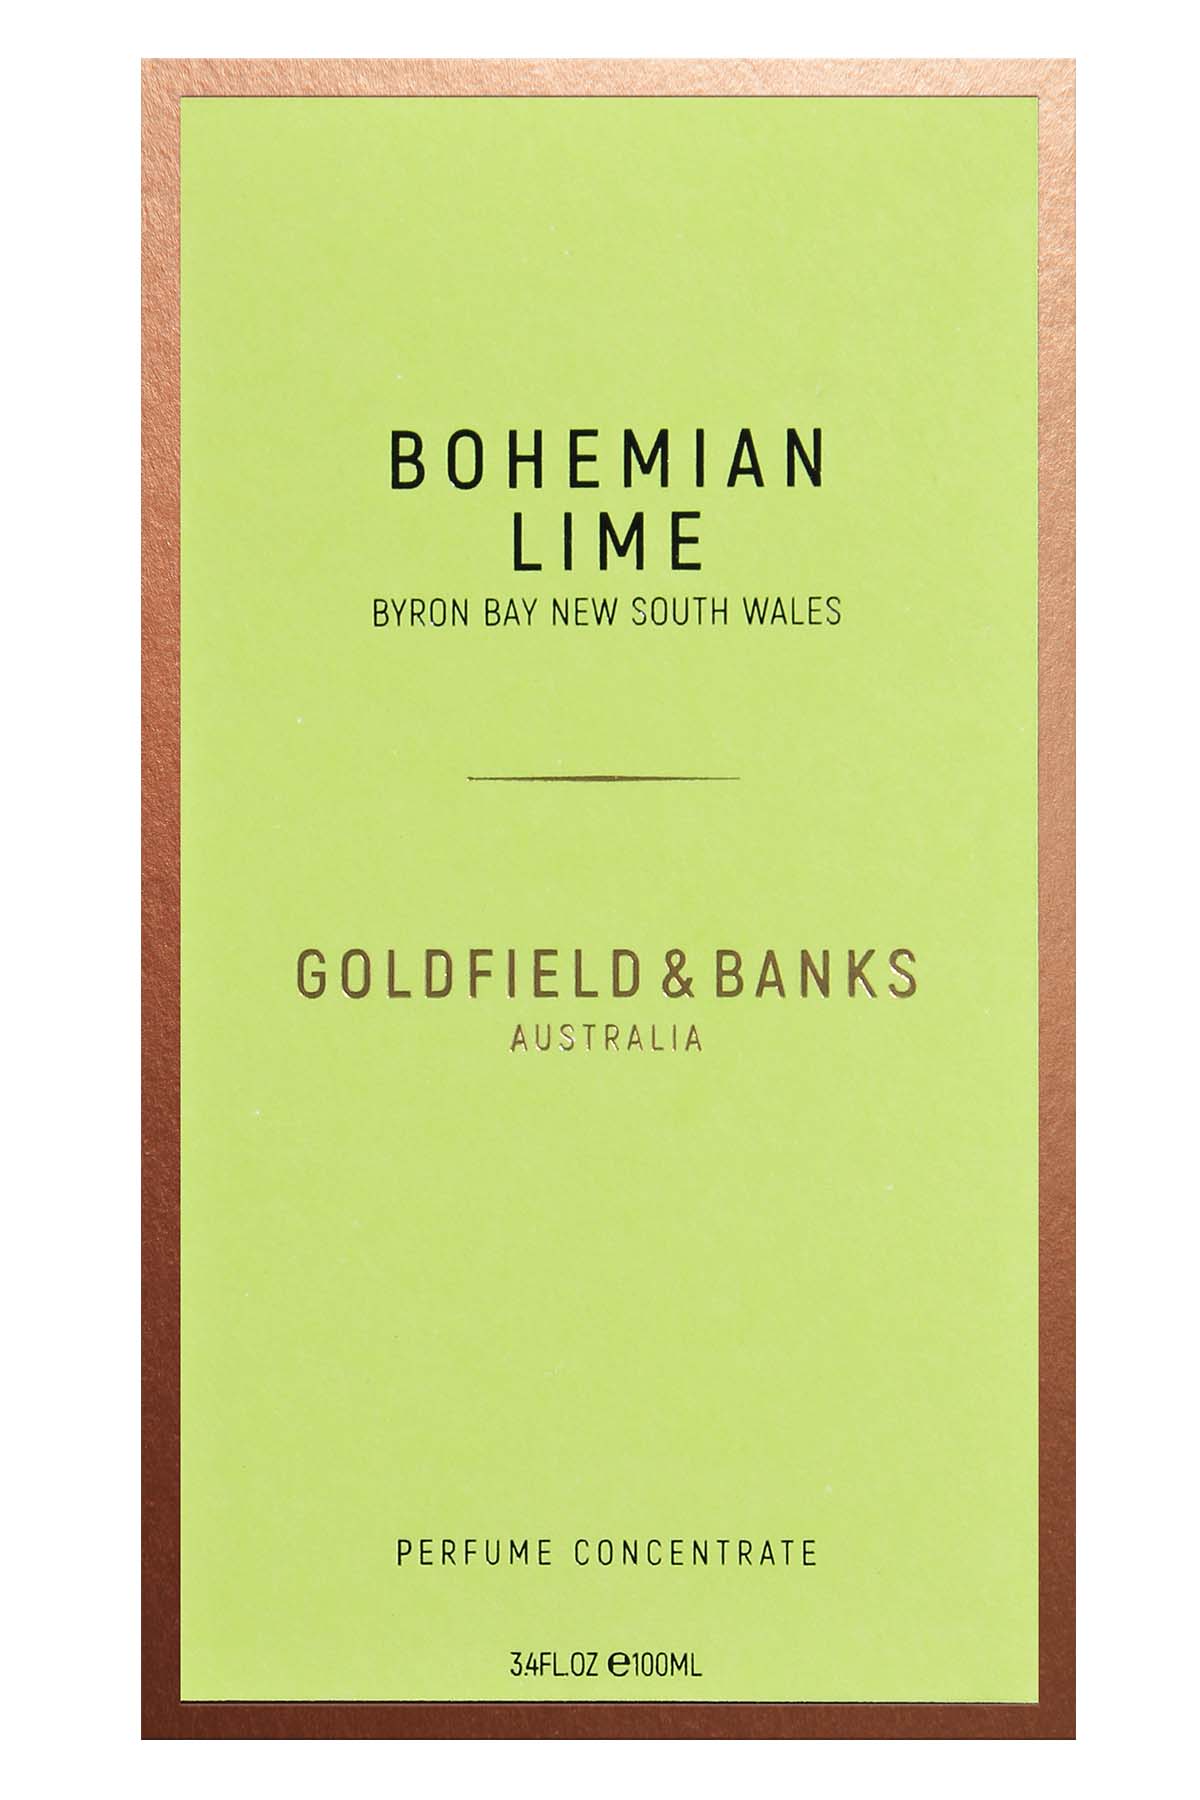 Goldfield & Banks Bohemian Lime Perfume Concentrate 100ml Box